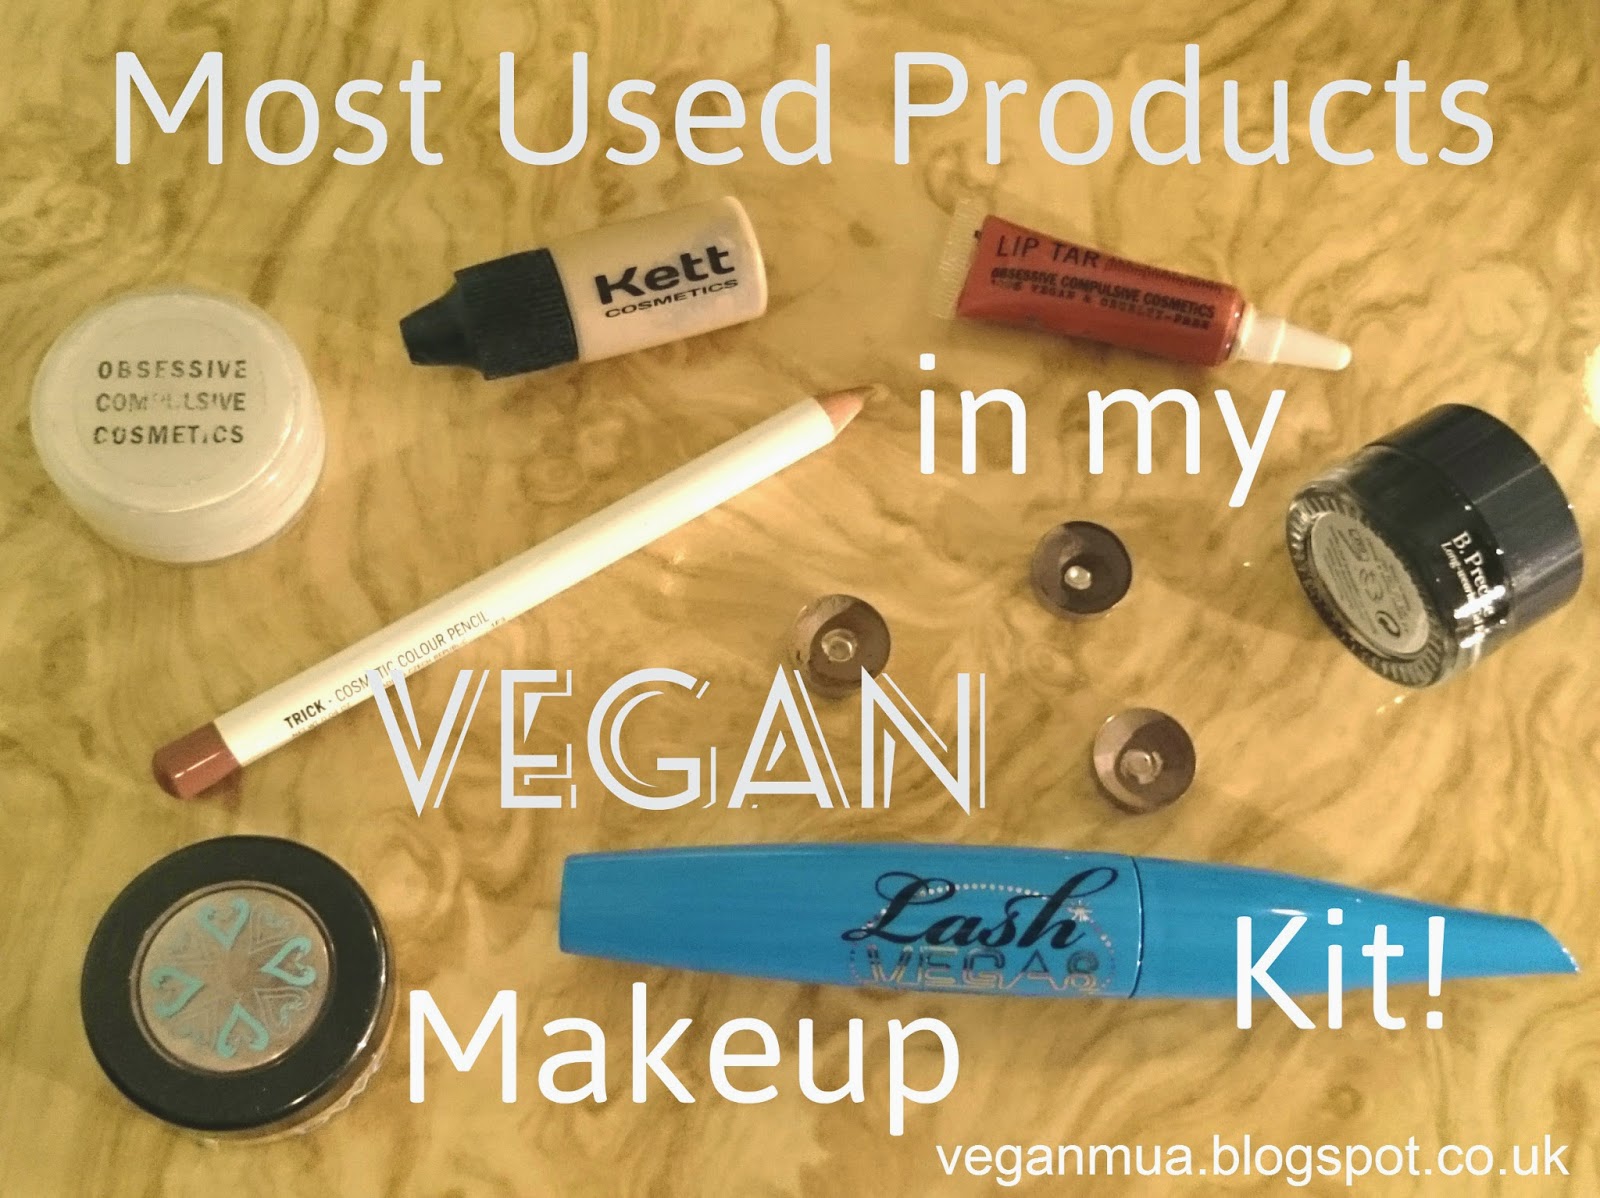 Most Used Products in my Vegan Makeup Kit